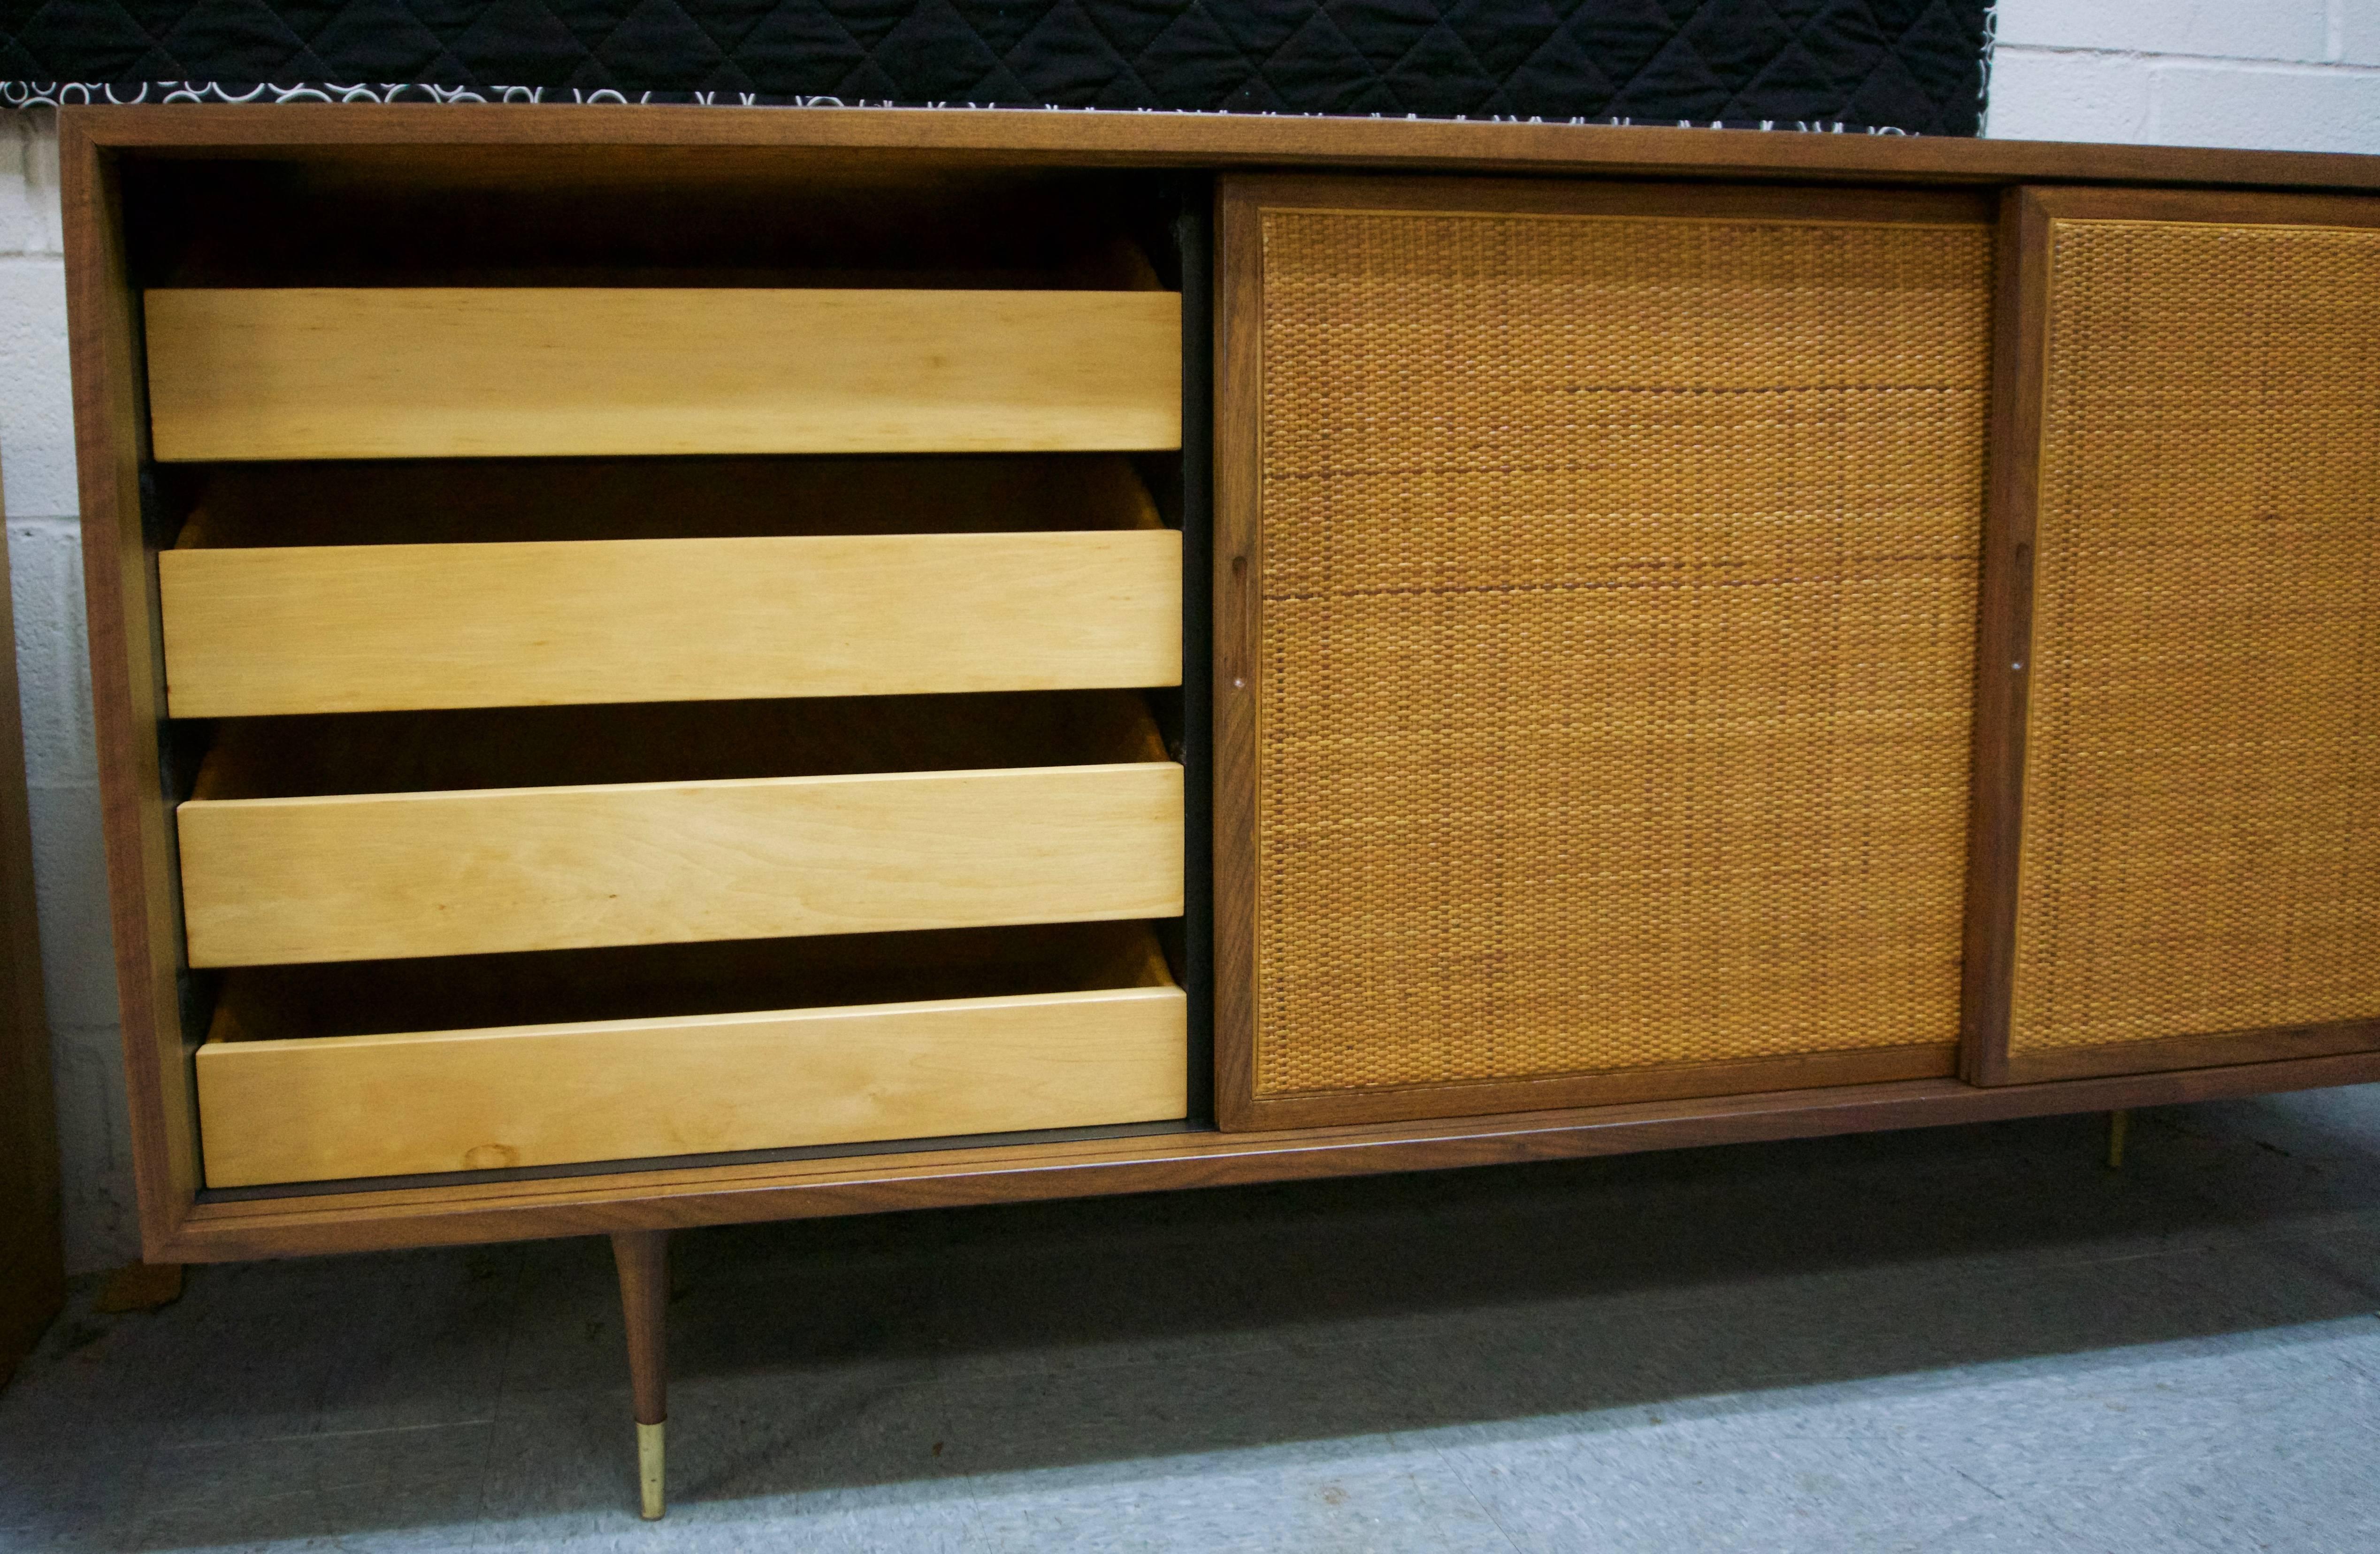 1960 American Walnut Credenza with Woven Cane Doors In Good Condition For Sale In Hudson, NY